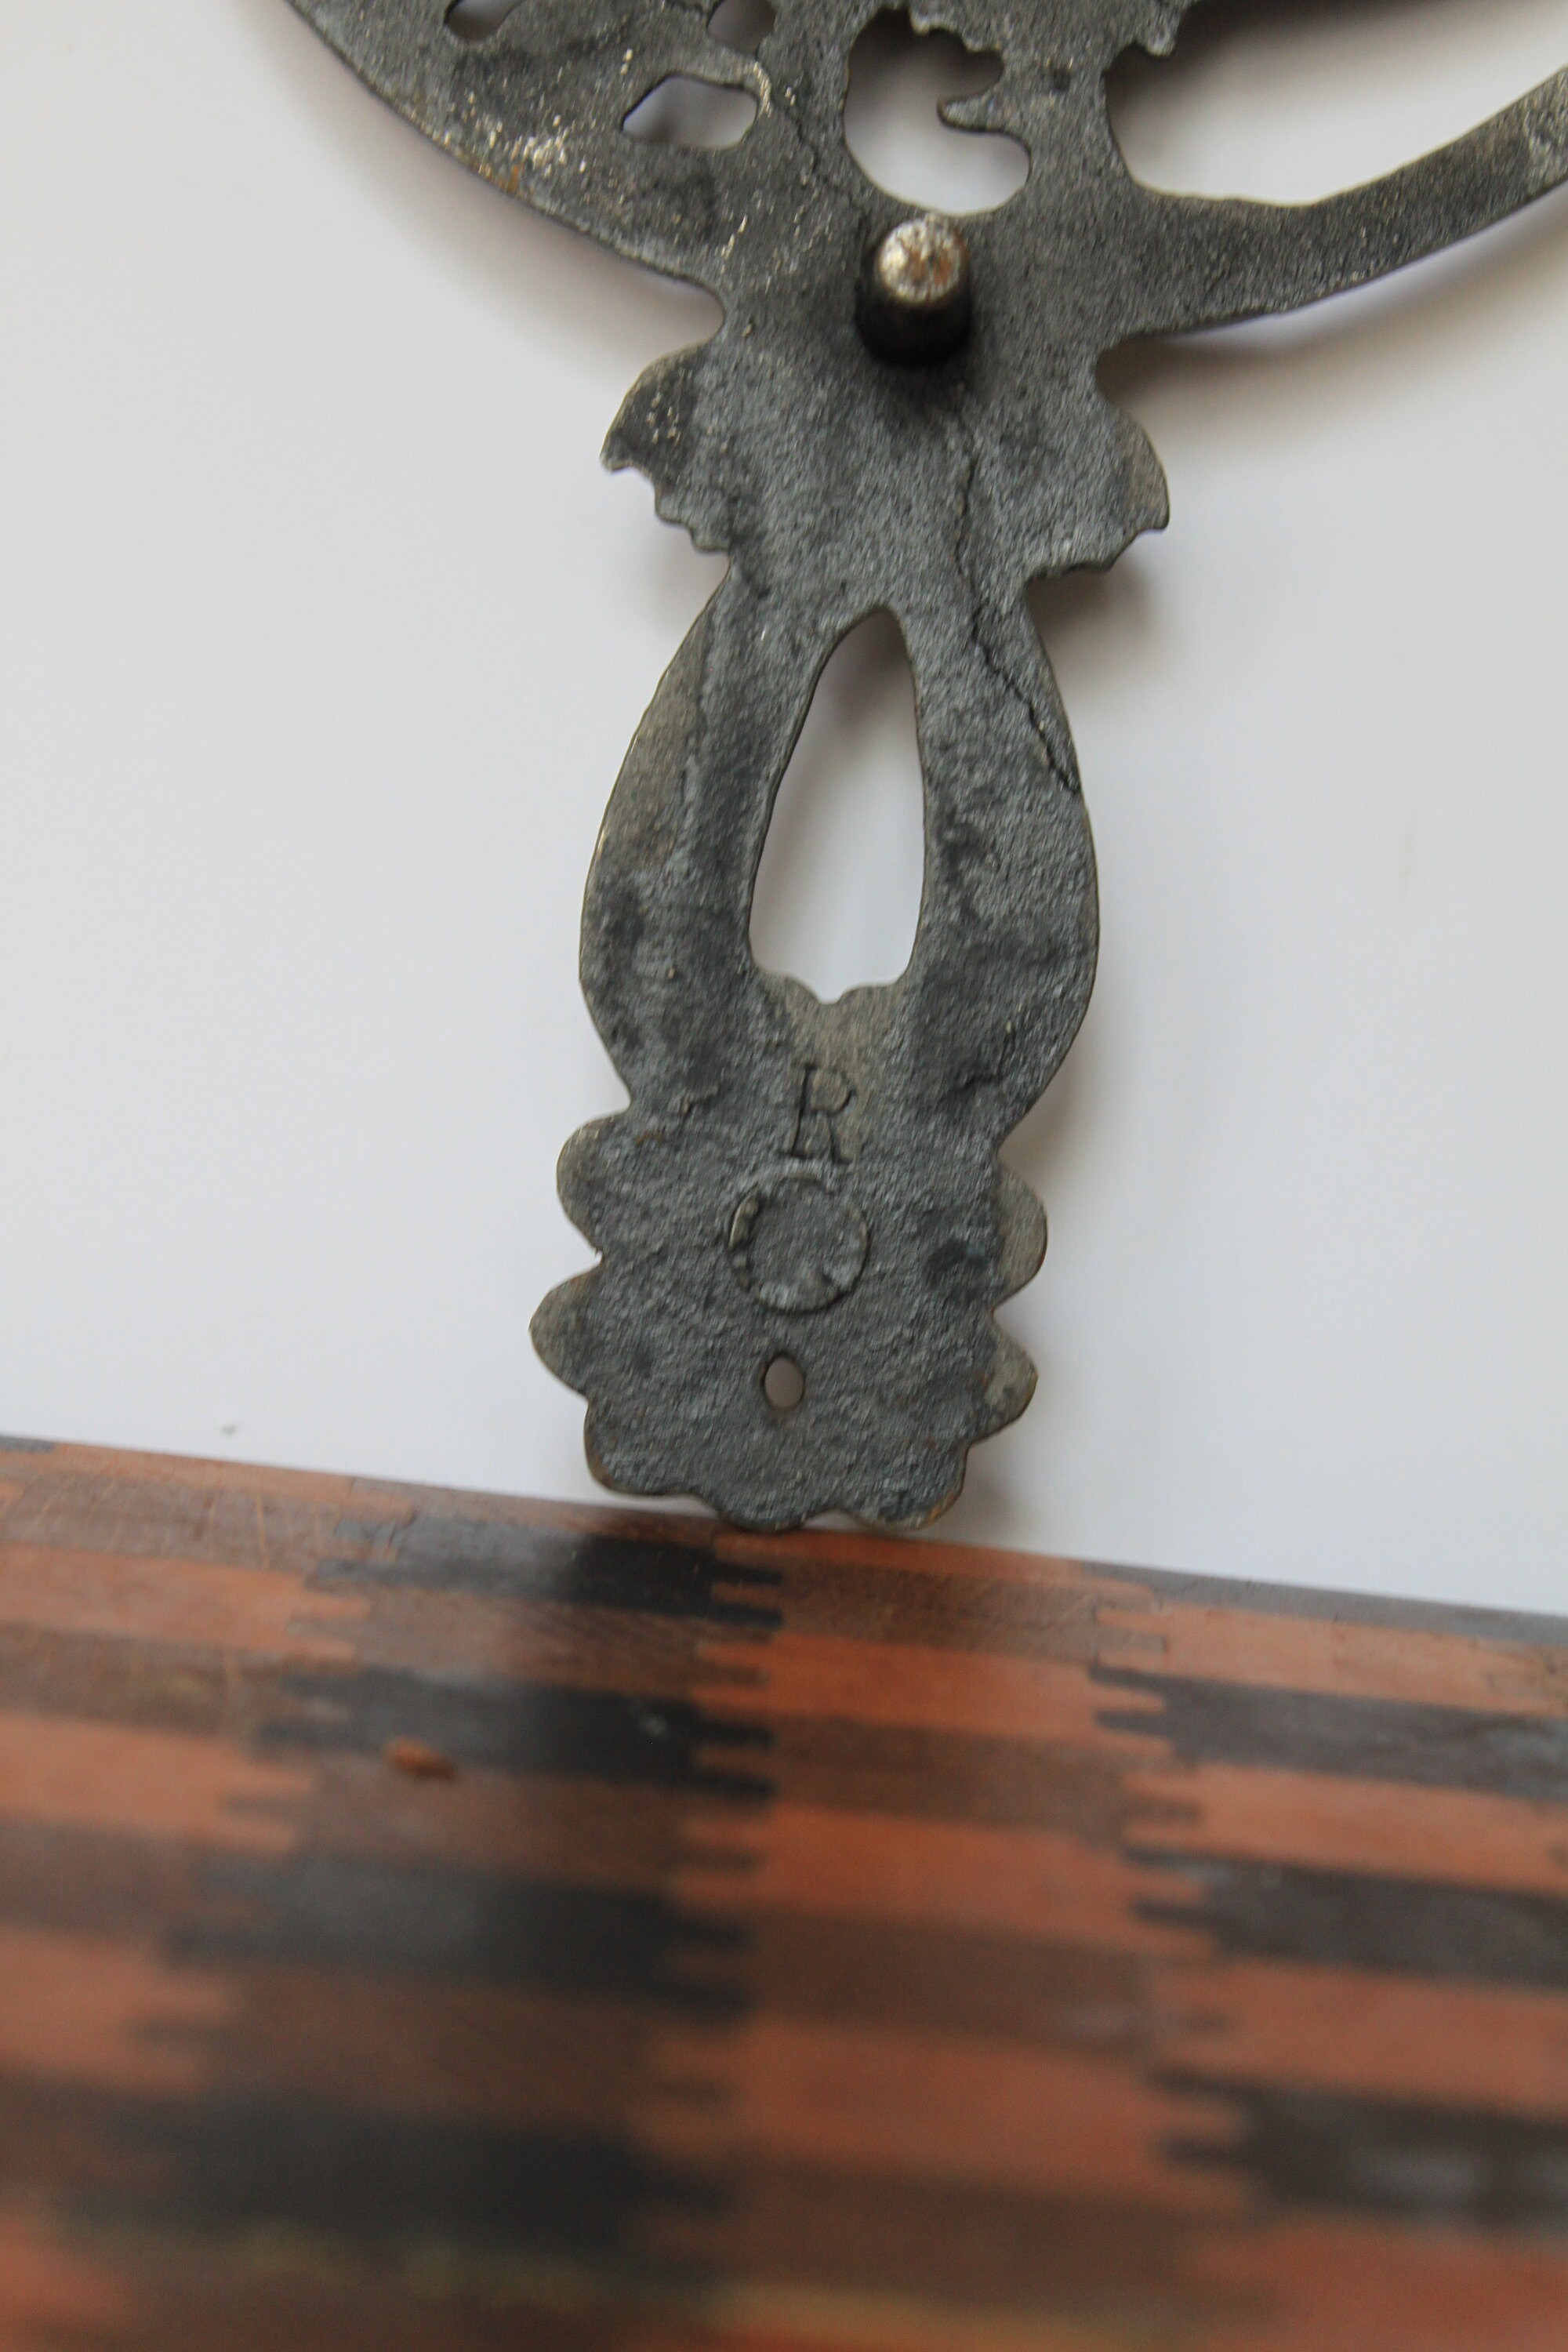 Details about   Cast Iron Rooster Trivet with rubber feet Country Decor